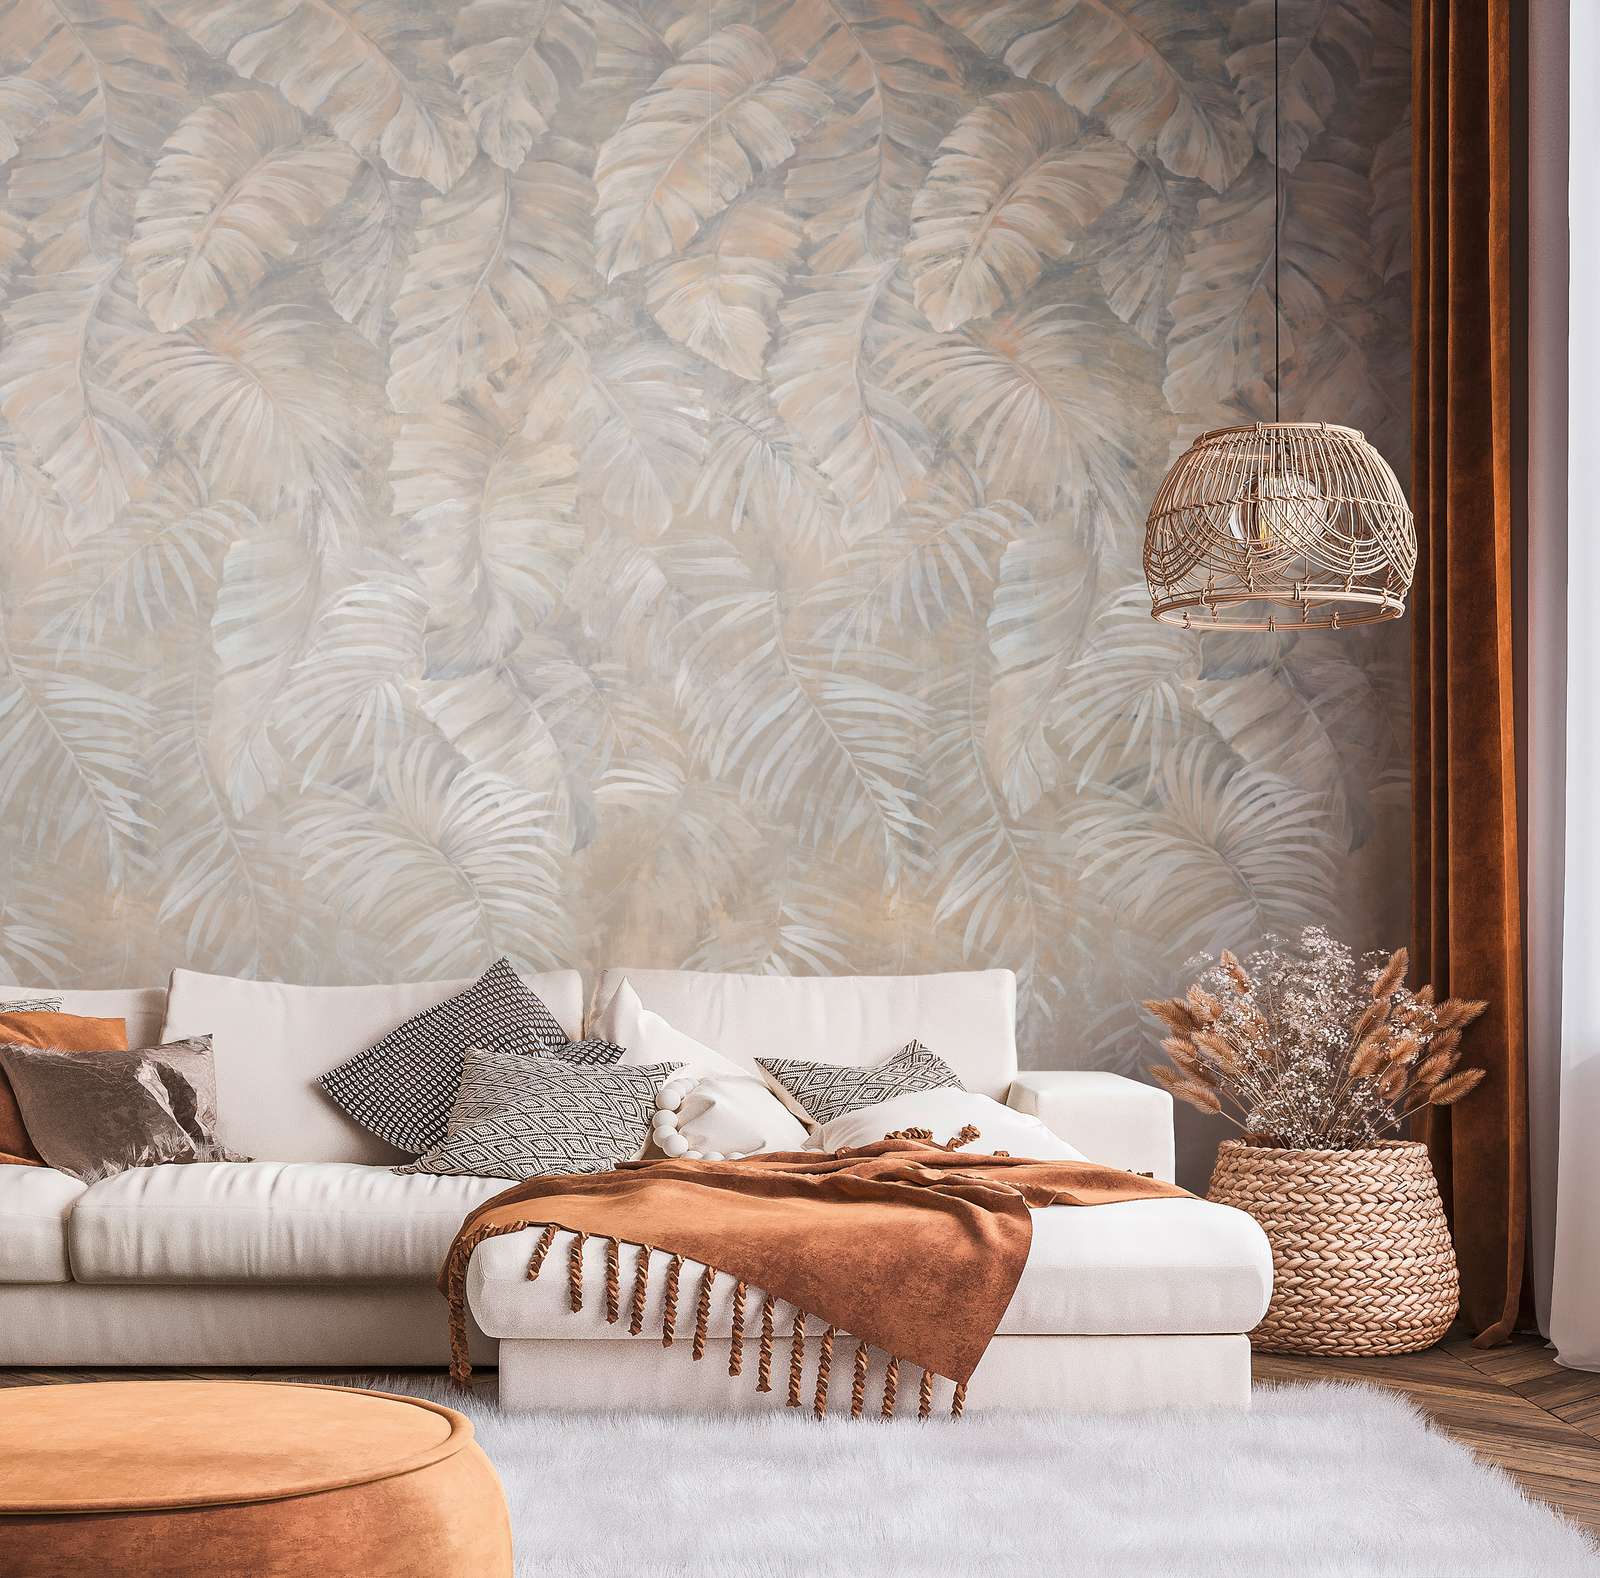             Large palm leaves wallpaper in subtle earth tones - brown, beige, cream
        